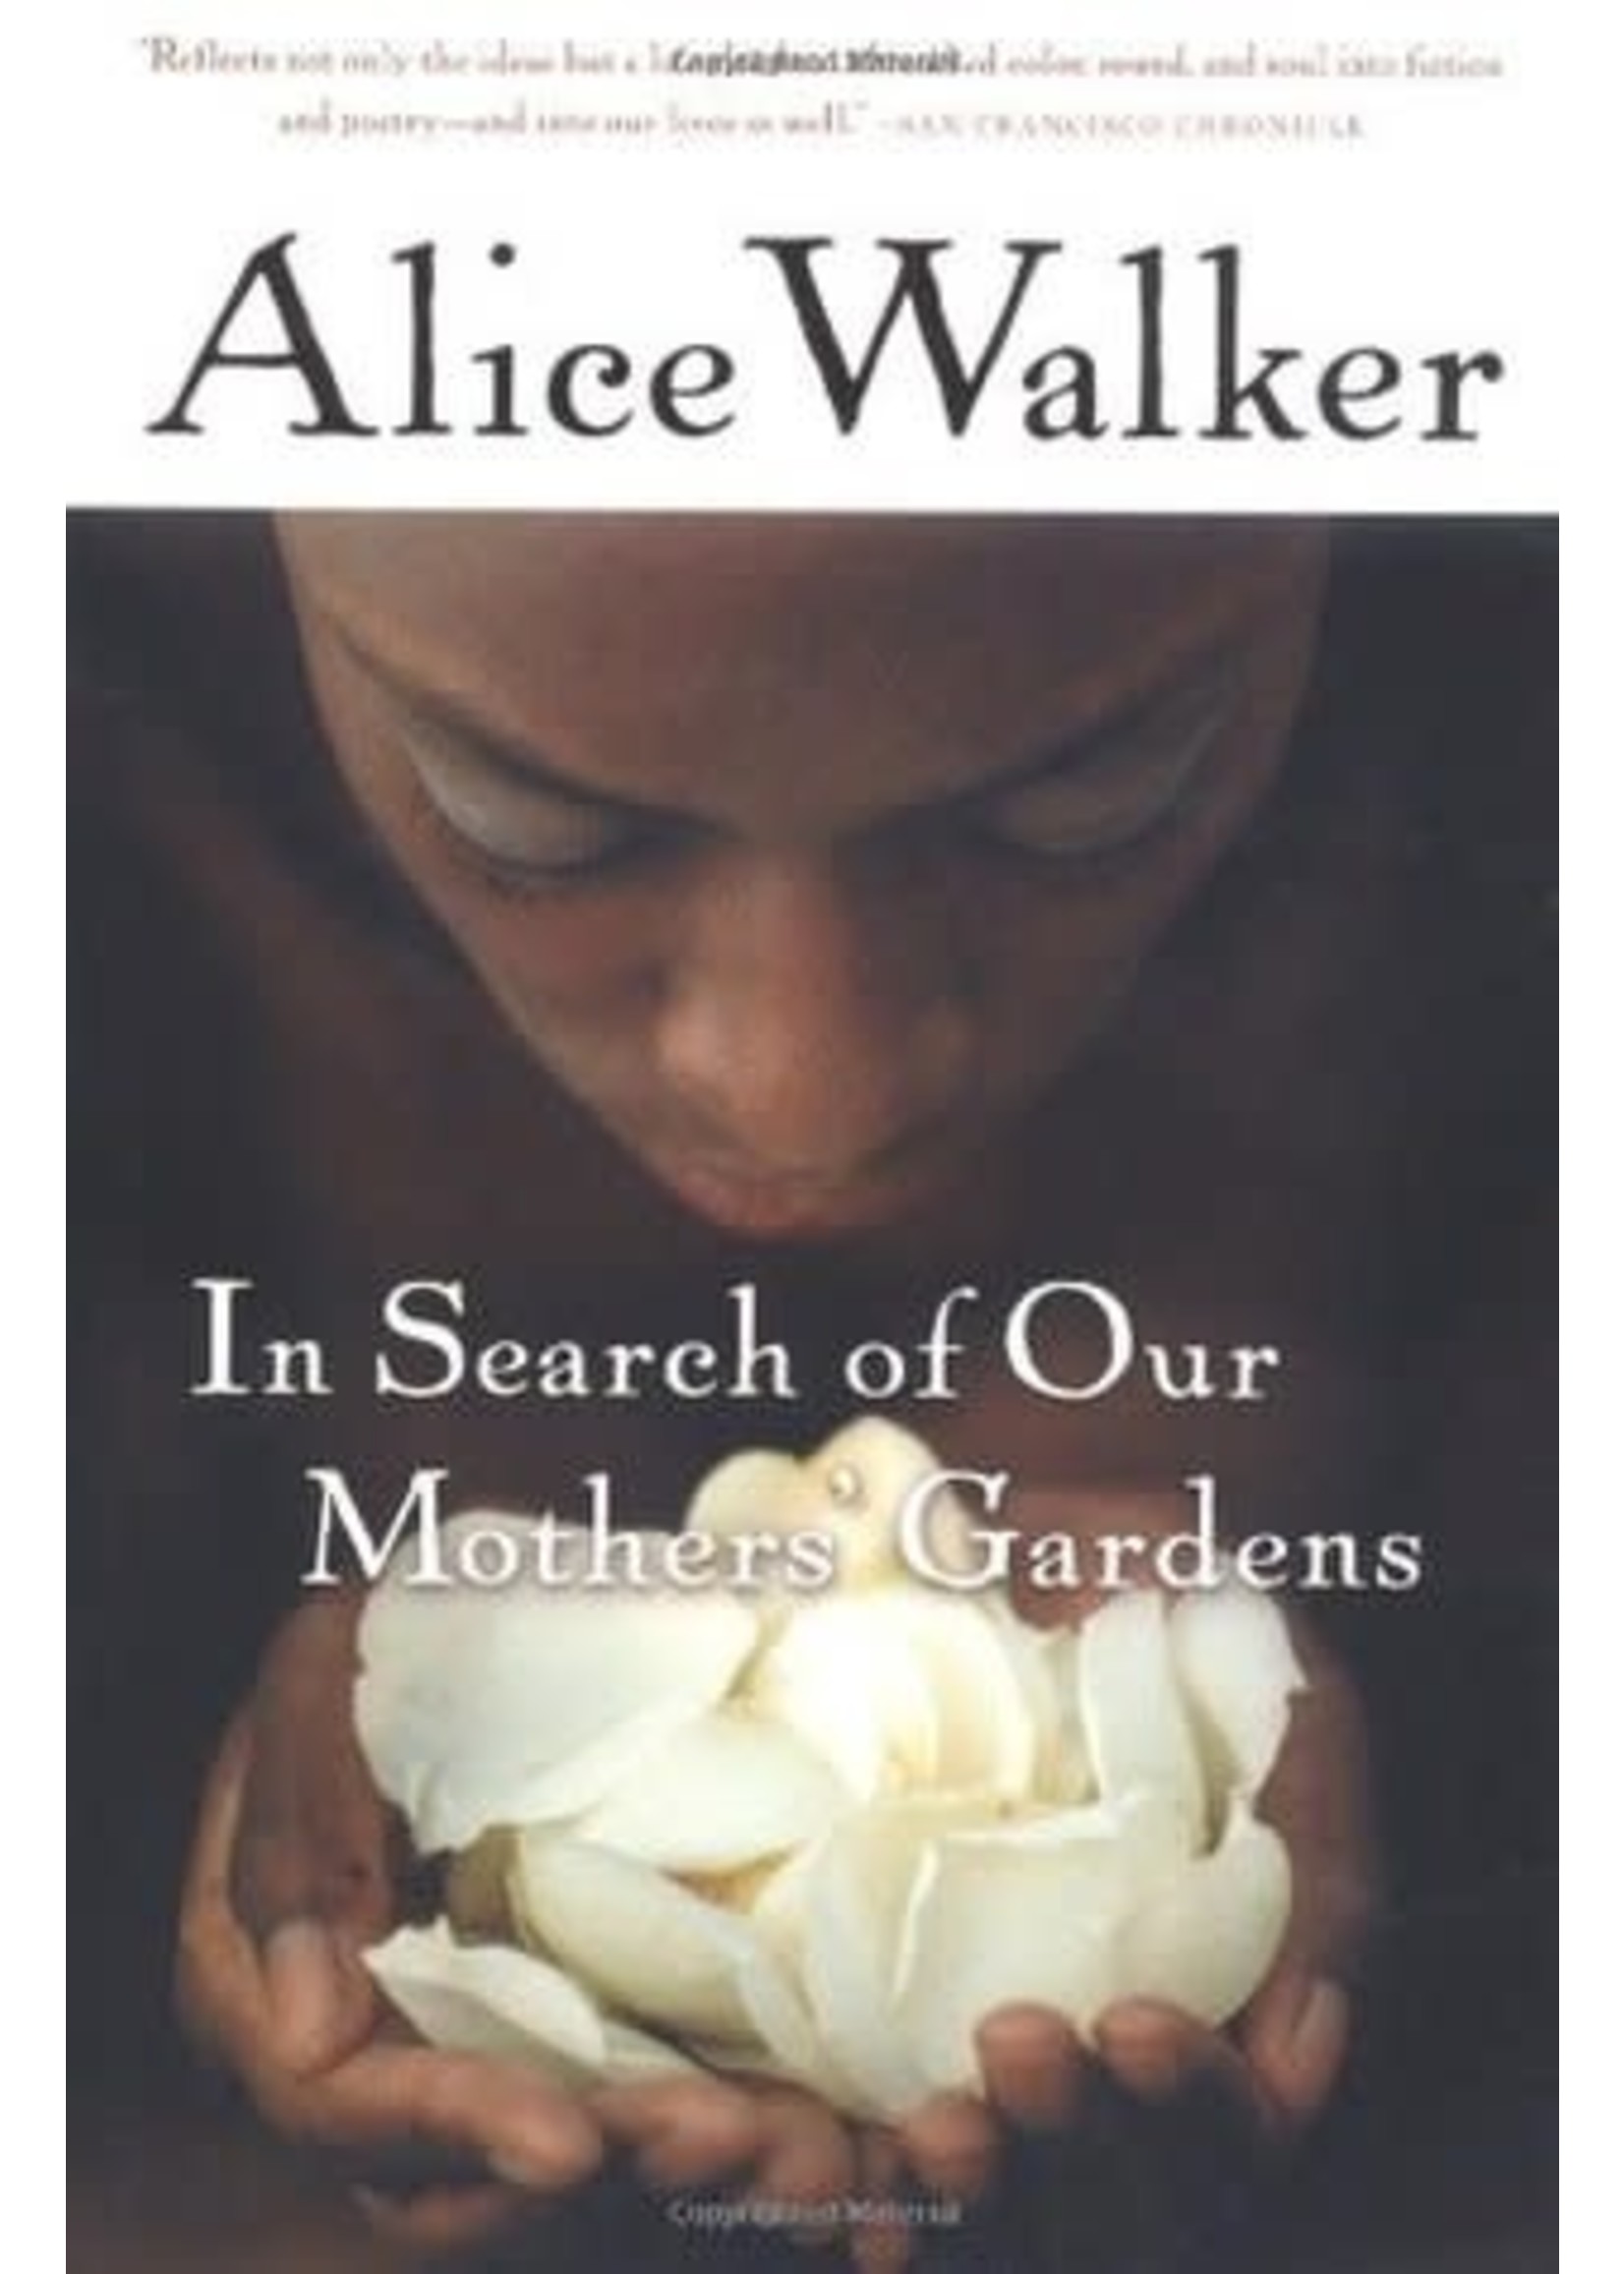 In Search of Our Mother's Gardens by Alice Walker